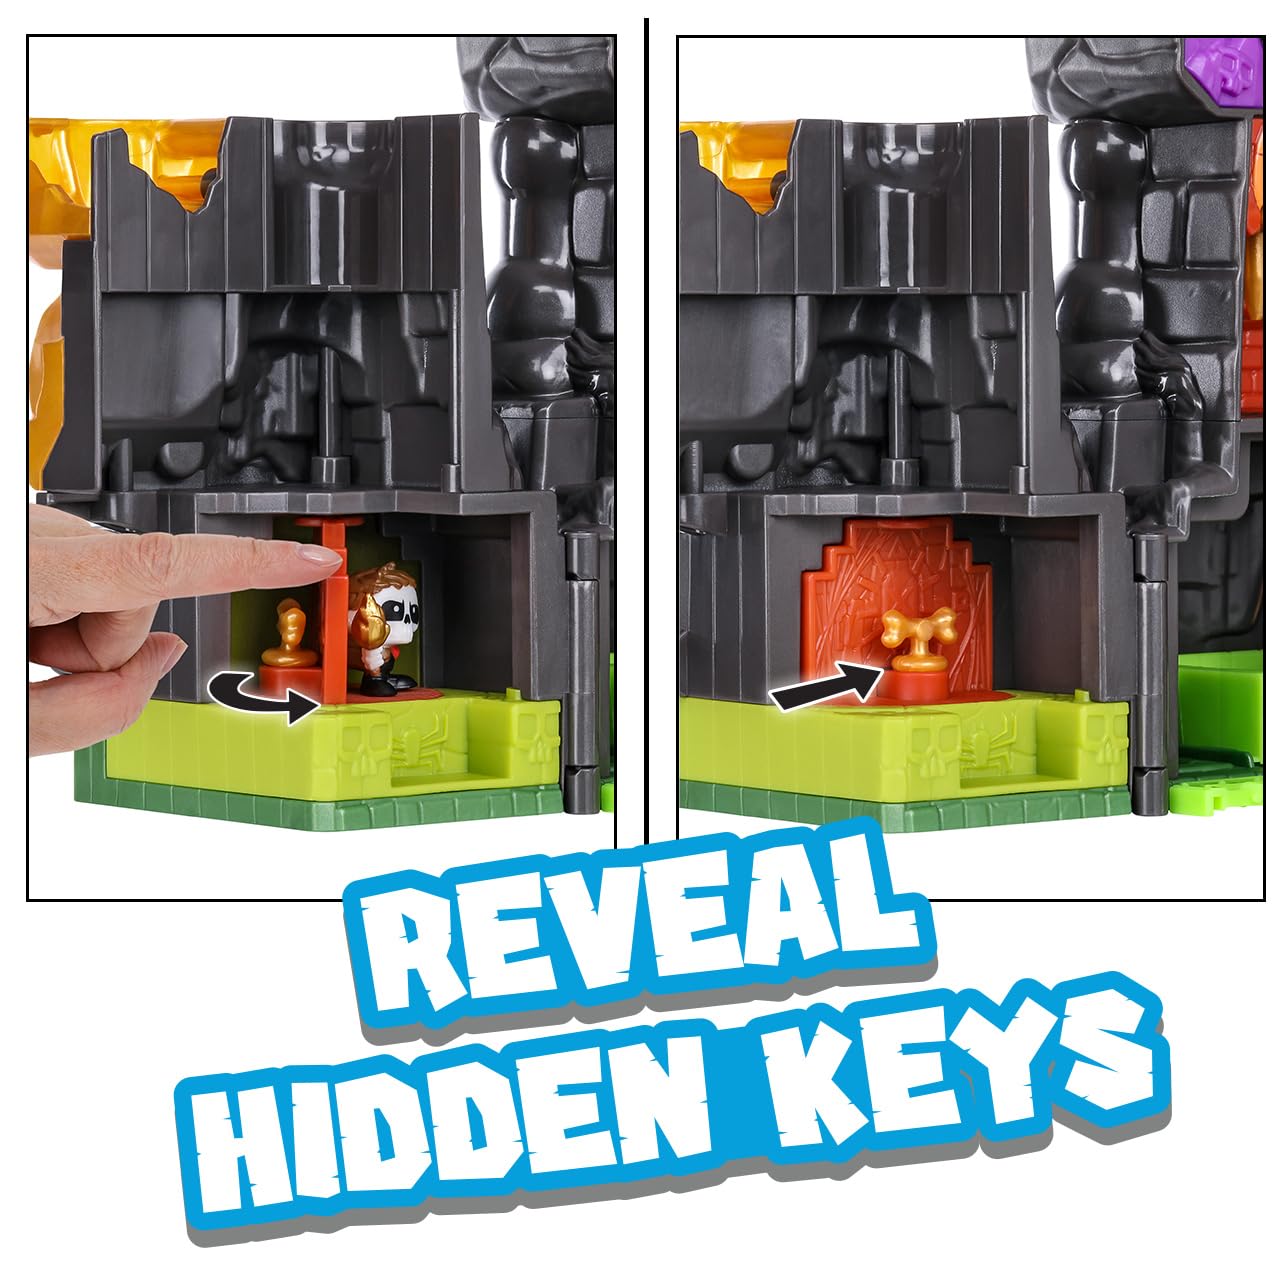 TREASURE X Lost Lands Skull Island Skull Temple Mega Playset, 40 Levels of Adventure. 4 Micro Sized Action Figs. Survive The Traps and Discover Guaranteed Real Gold Dipped Treasure